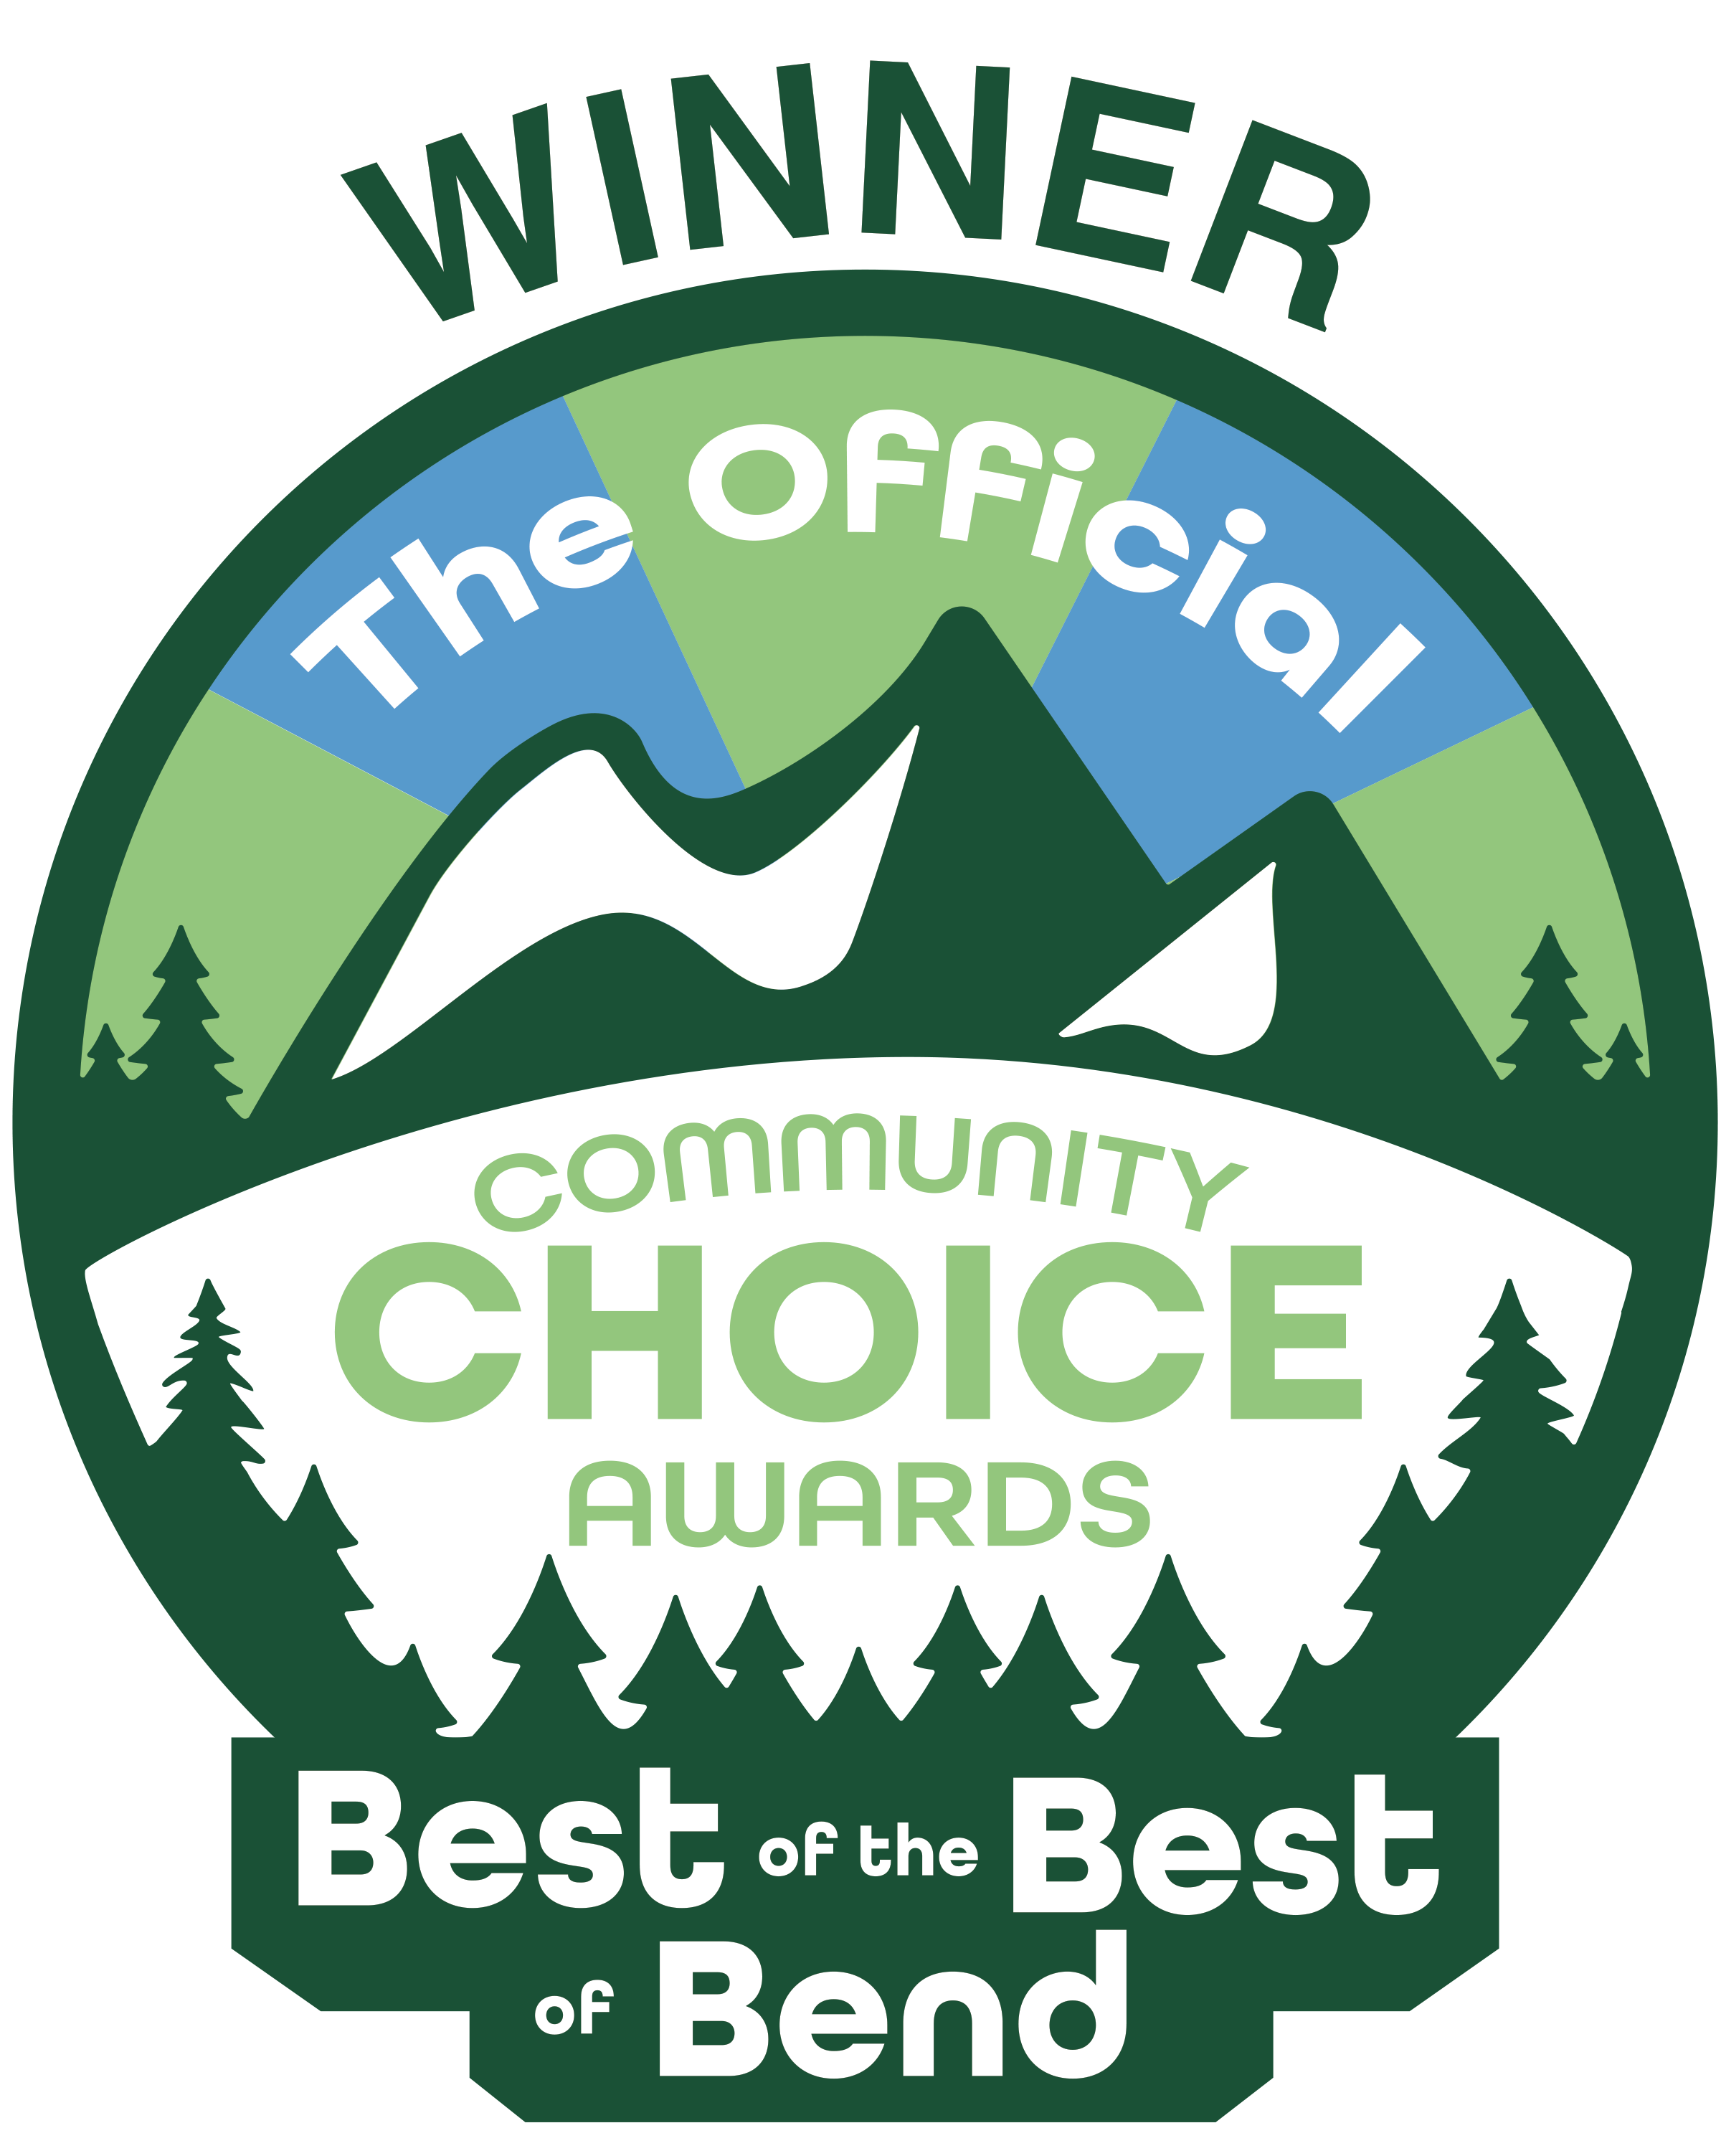 Best of the Best of Bend award winner for adult speech therapy in Central Oregon. 